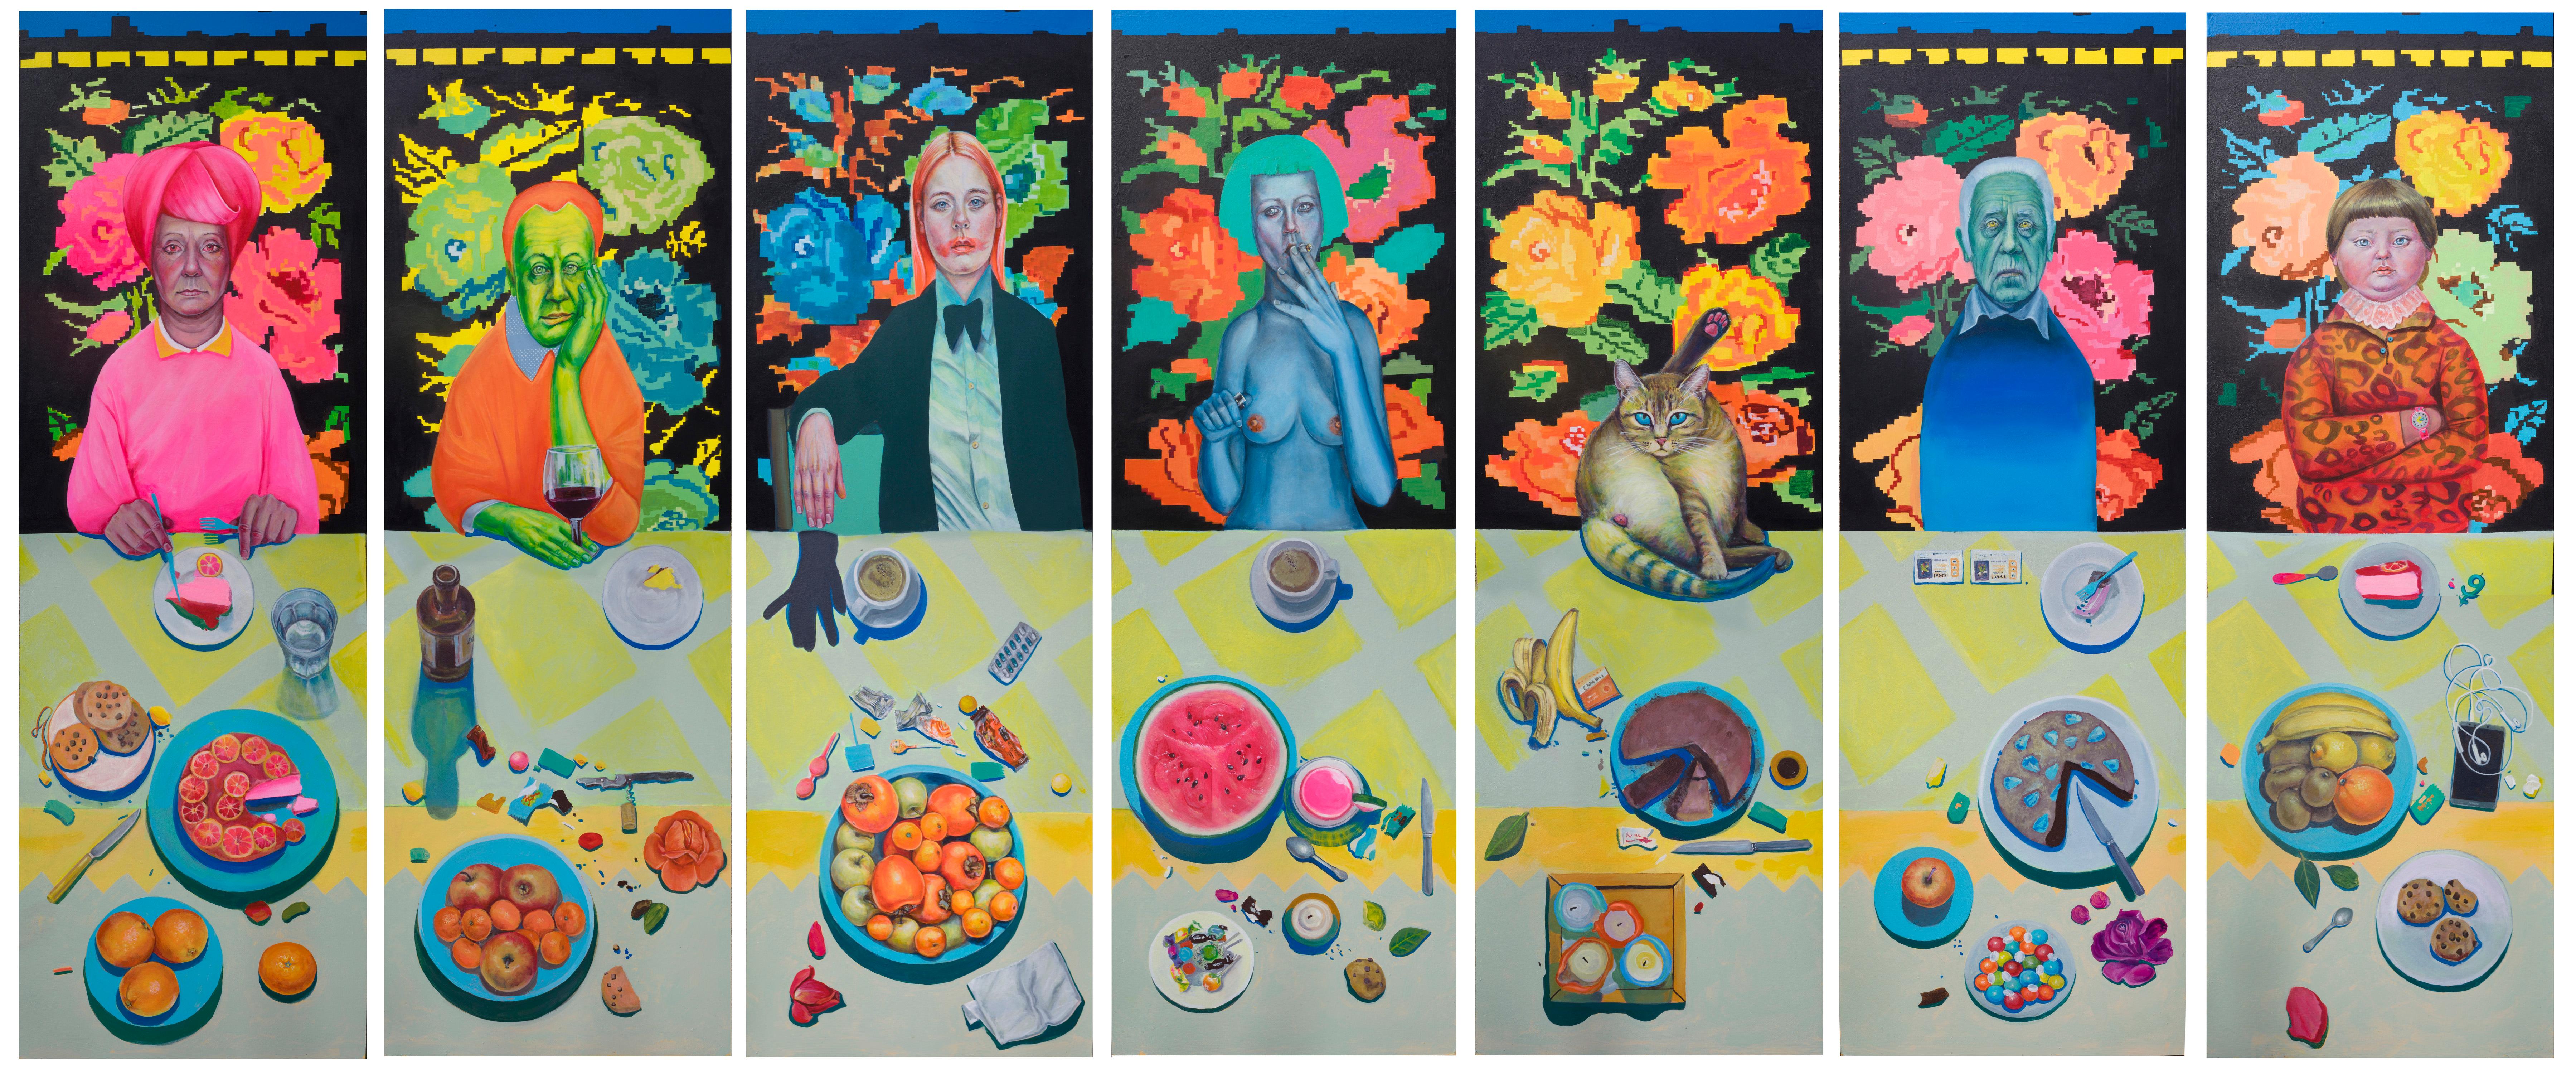 Huge Composition Of 7 Portraits And Still Lifes. 6/25 Limited Edition on Dibond